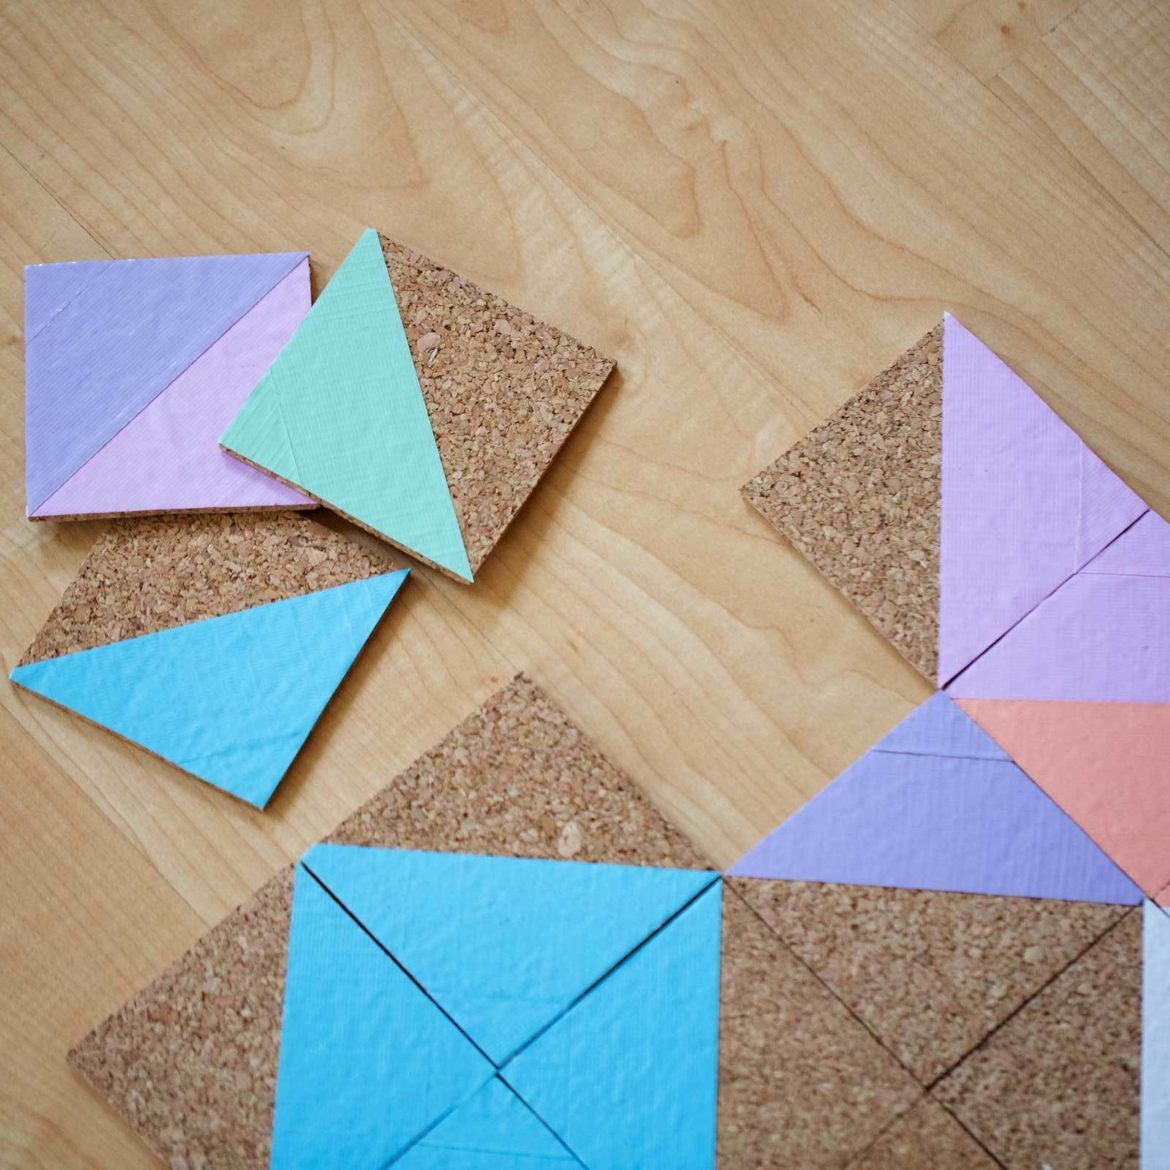 Make a puzzle with cork and Duck Tape